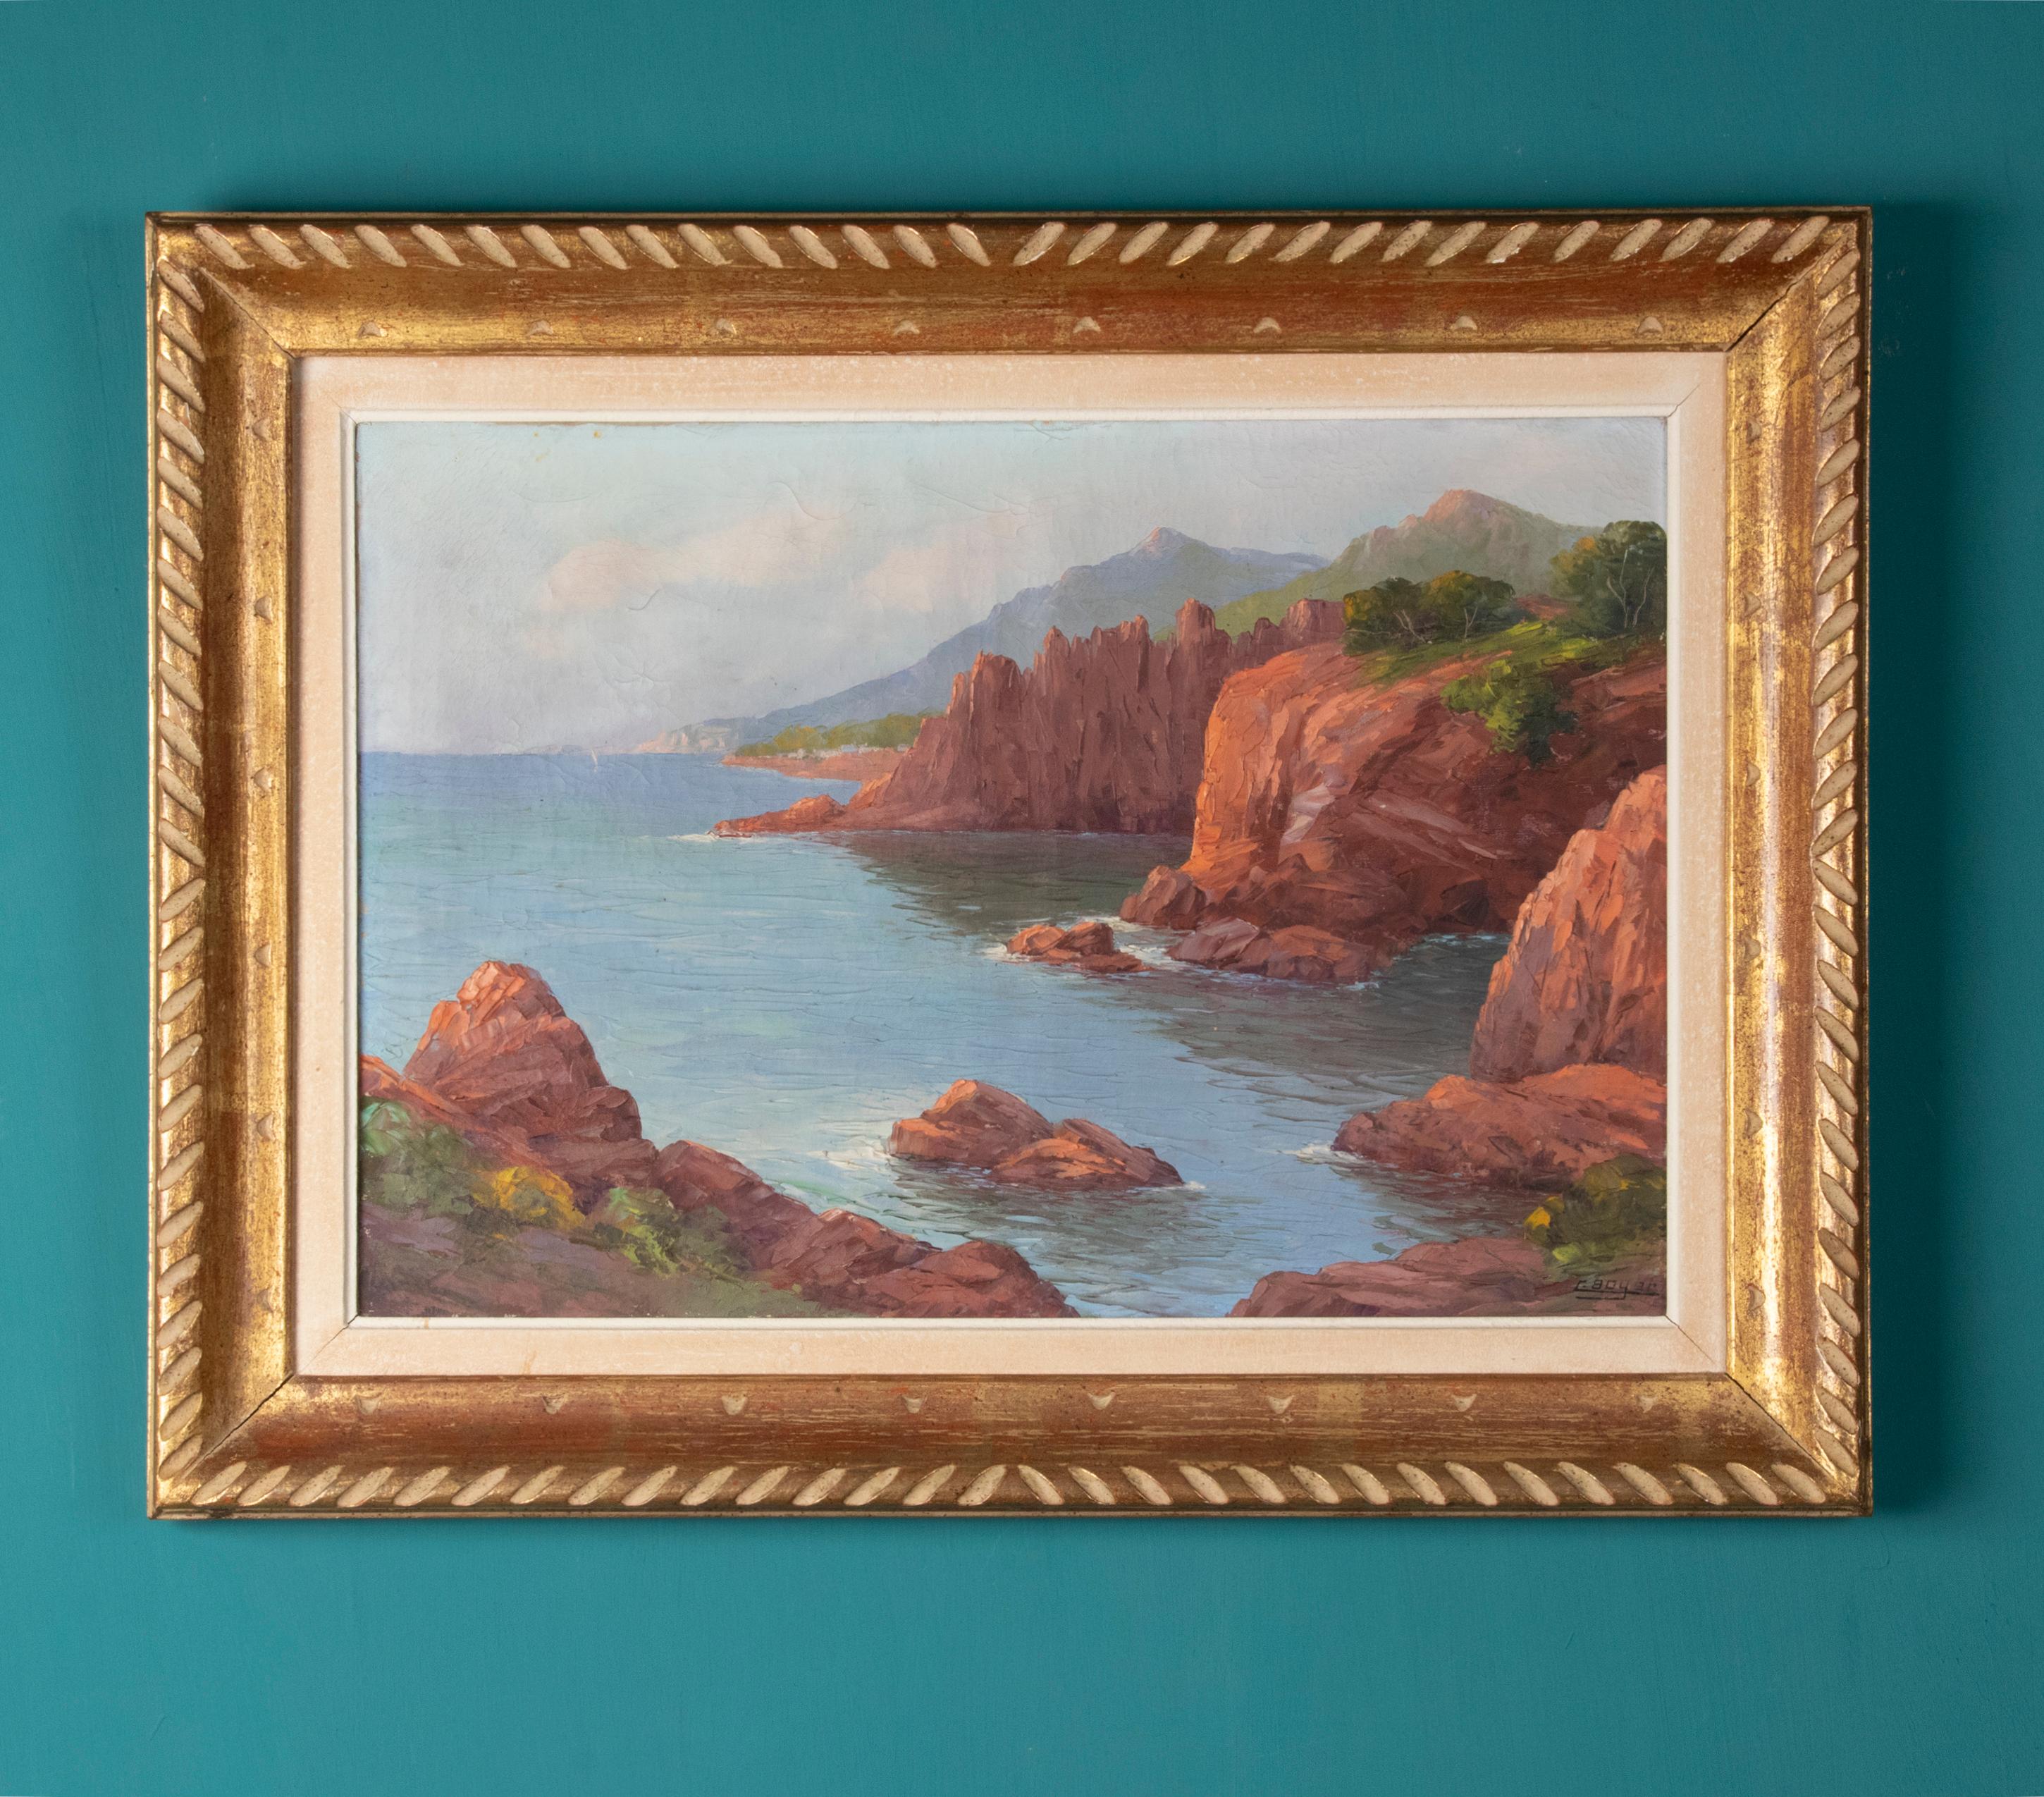 This painting shows a Mediterranean coastal landscape from the French region of Provence on the Cote d'azur. The red rocks that you see in this painting are characteristic of the region. The paint is applied thickly, this provides extra depth in the